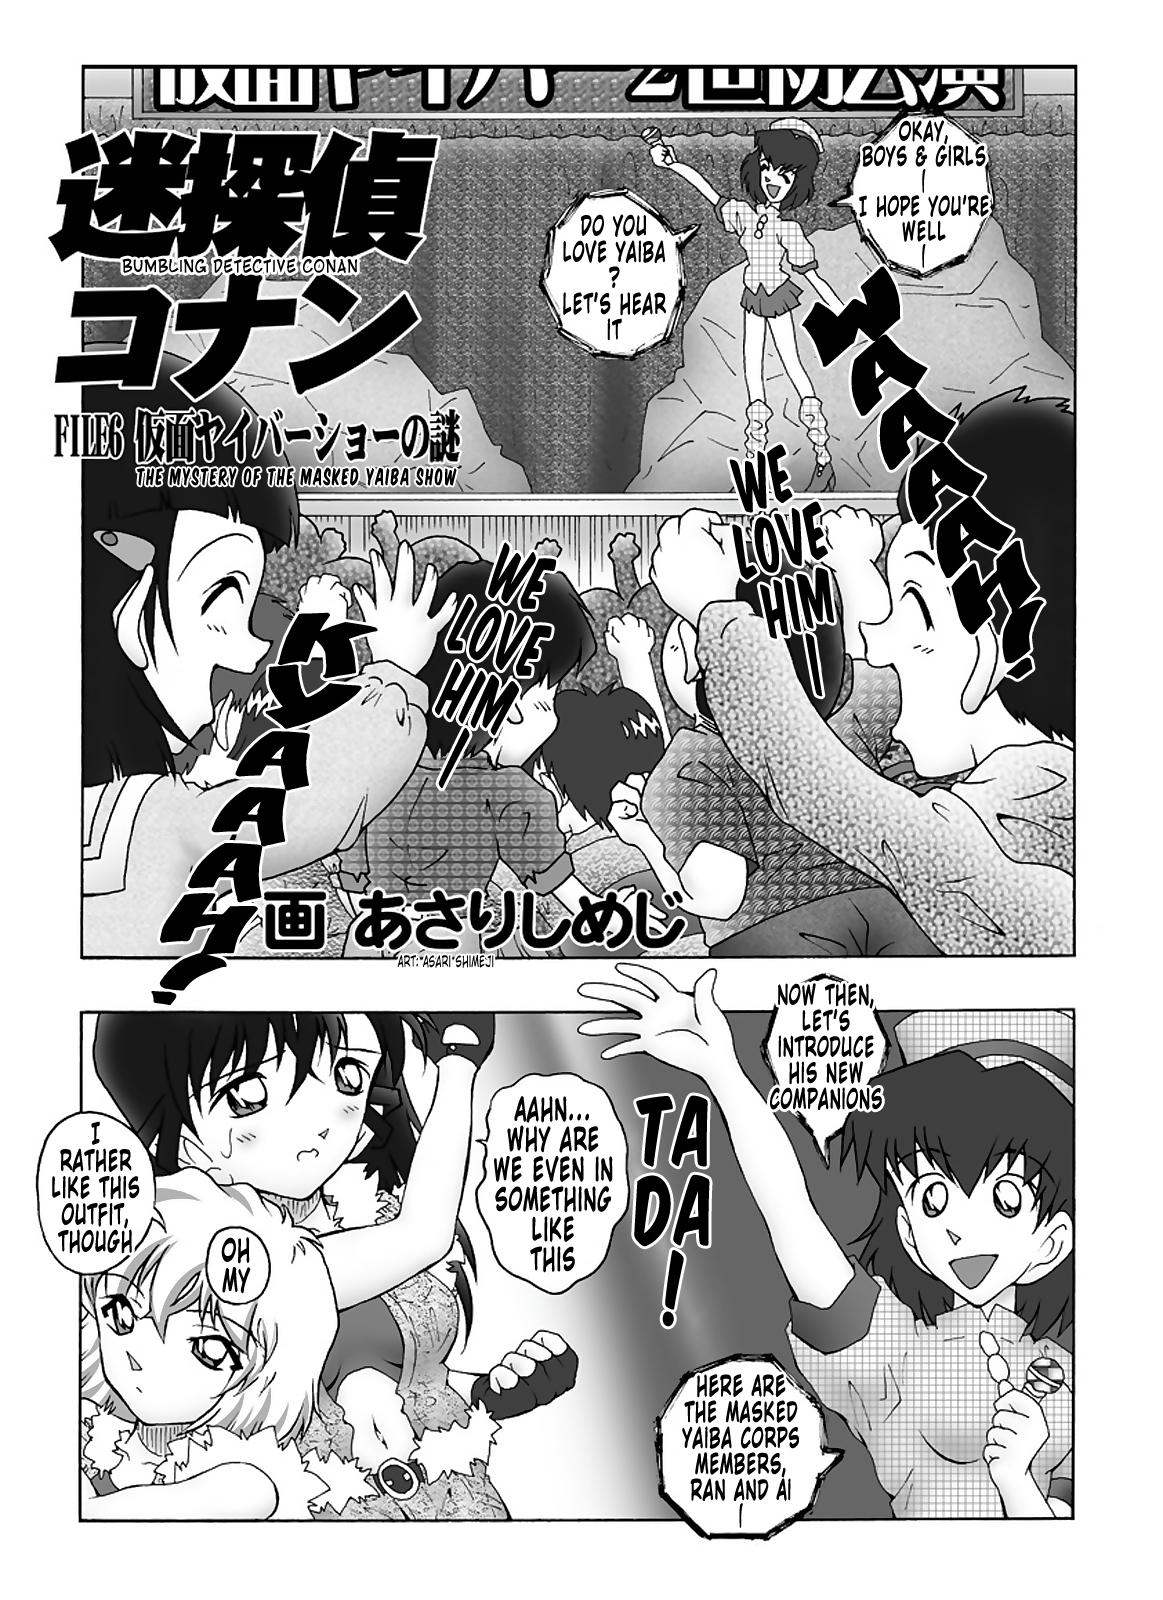 Audition Bumbling Detective Conan - File 6: The Mystery Of The Masked Yaiba Show - Detective conan Com - Page 4